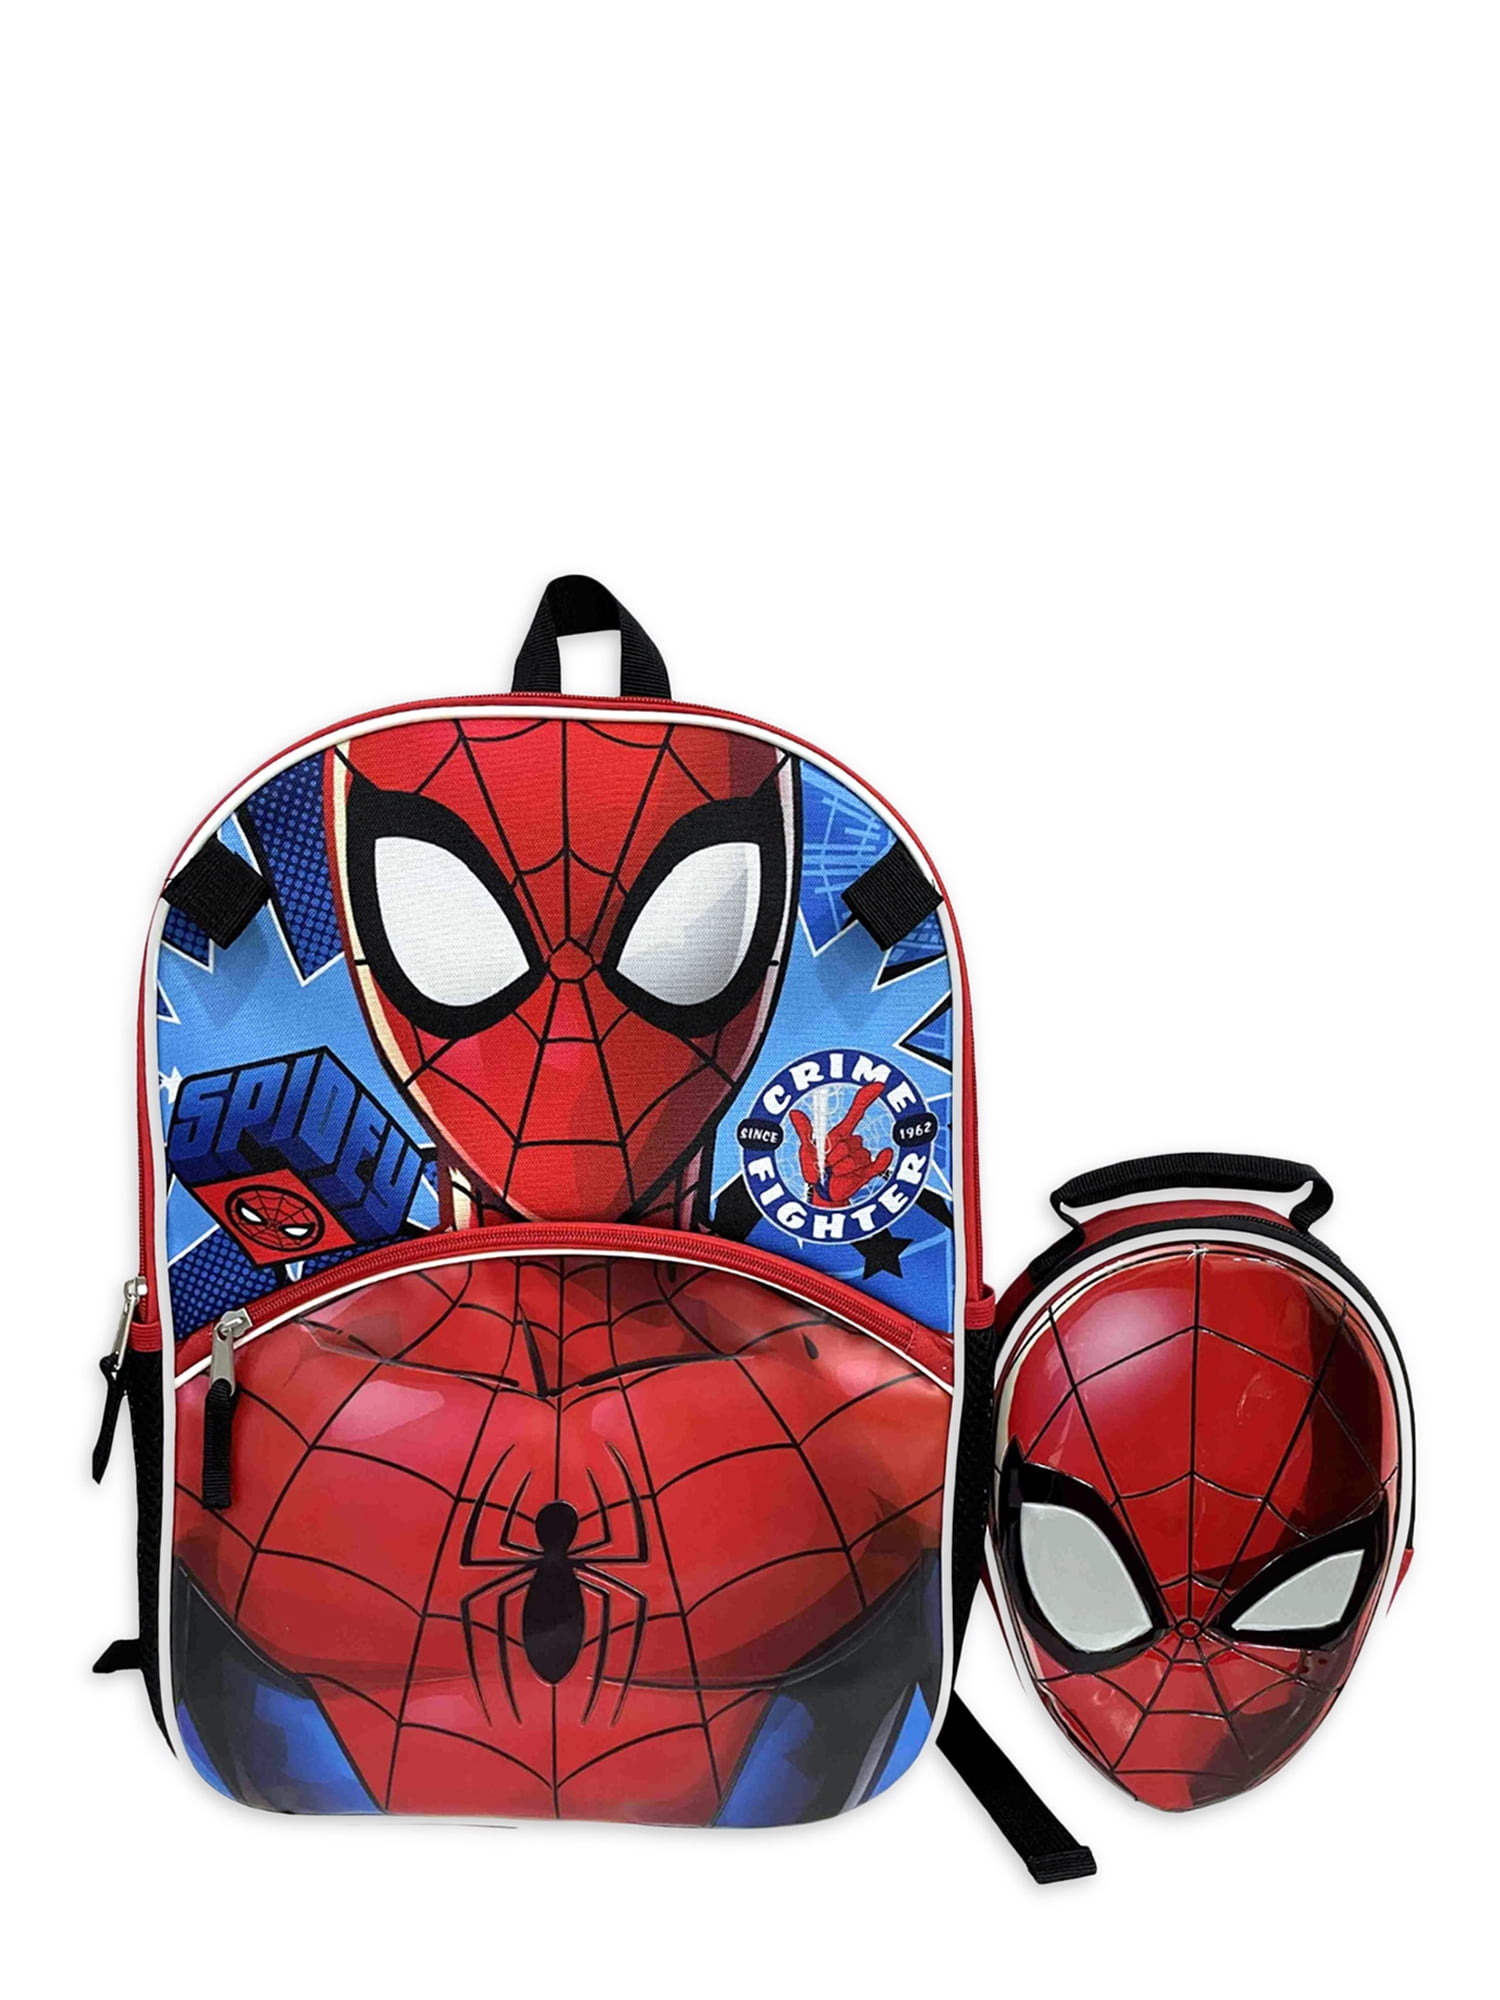 Marvel Spider-Man Dual-Compartment Lunch Bag Box Insulated Lunchbag Lunchbox Red 